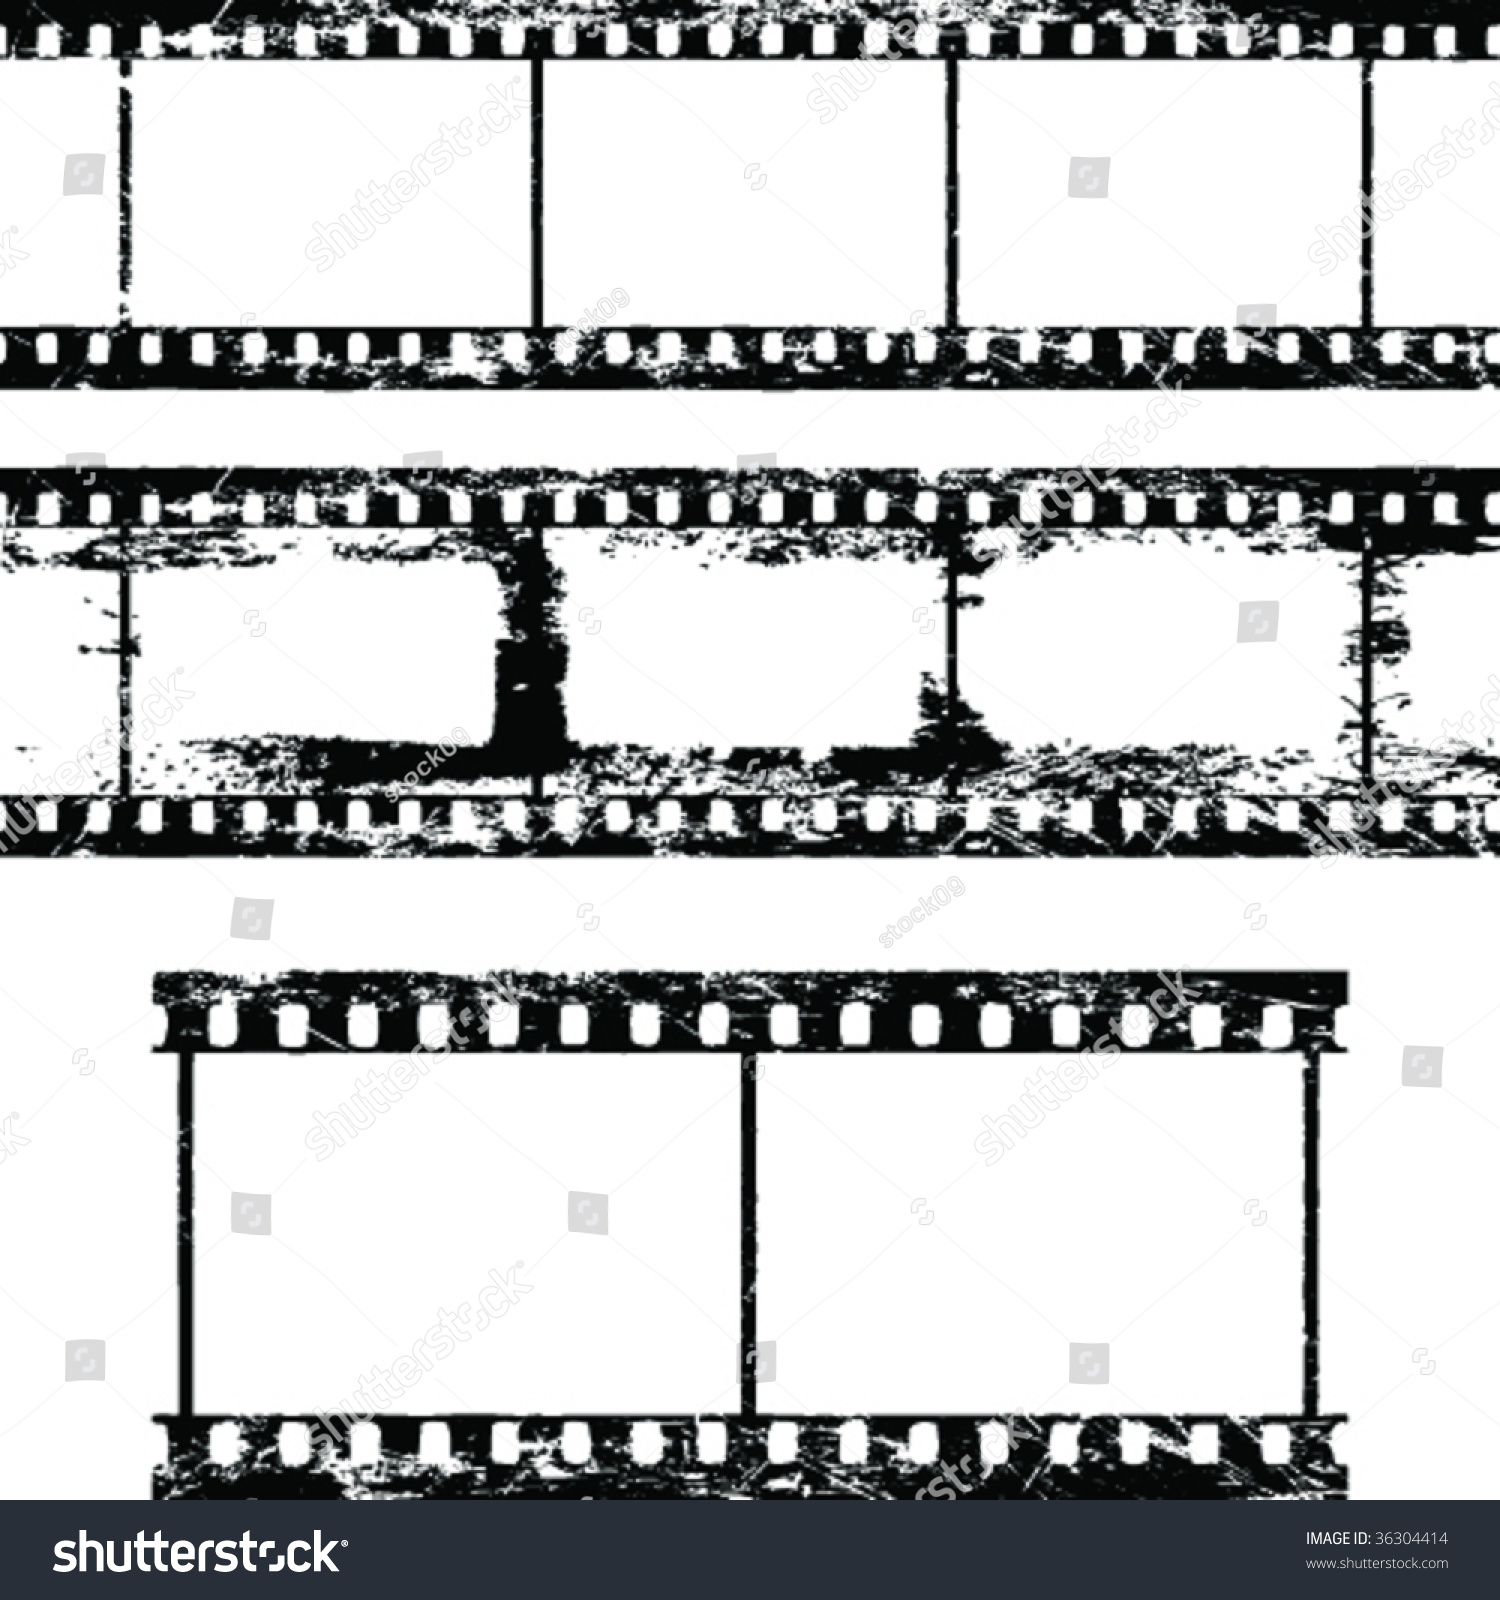 Isolated Film Frame Vector Collection - 36304414 : Shutterstock